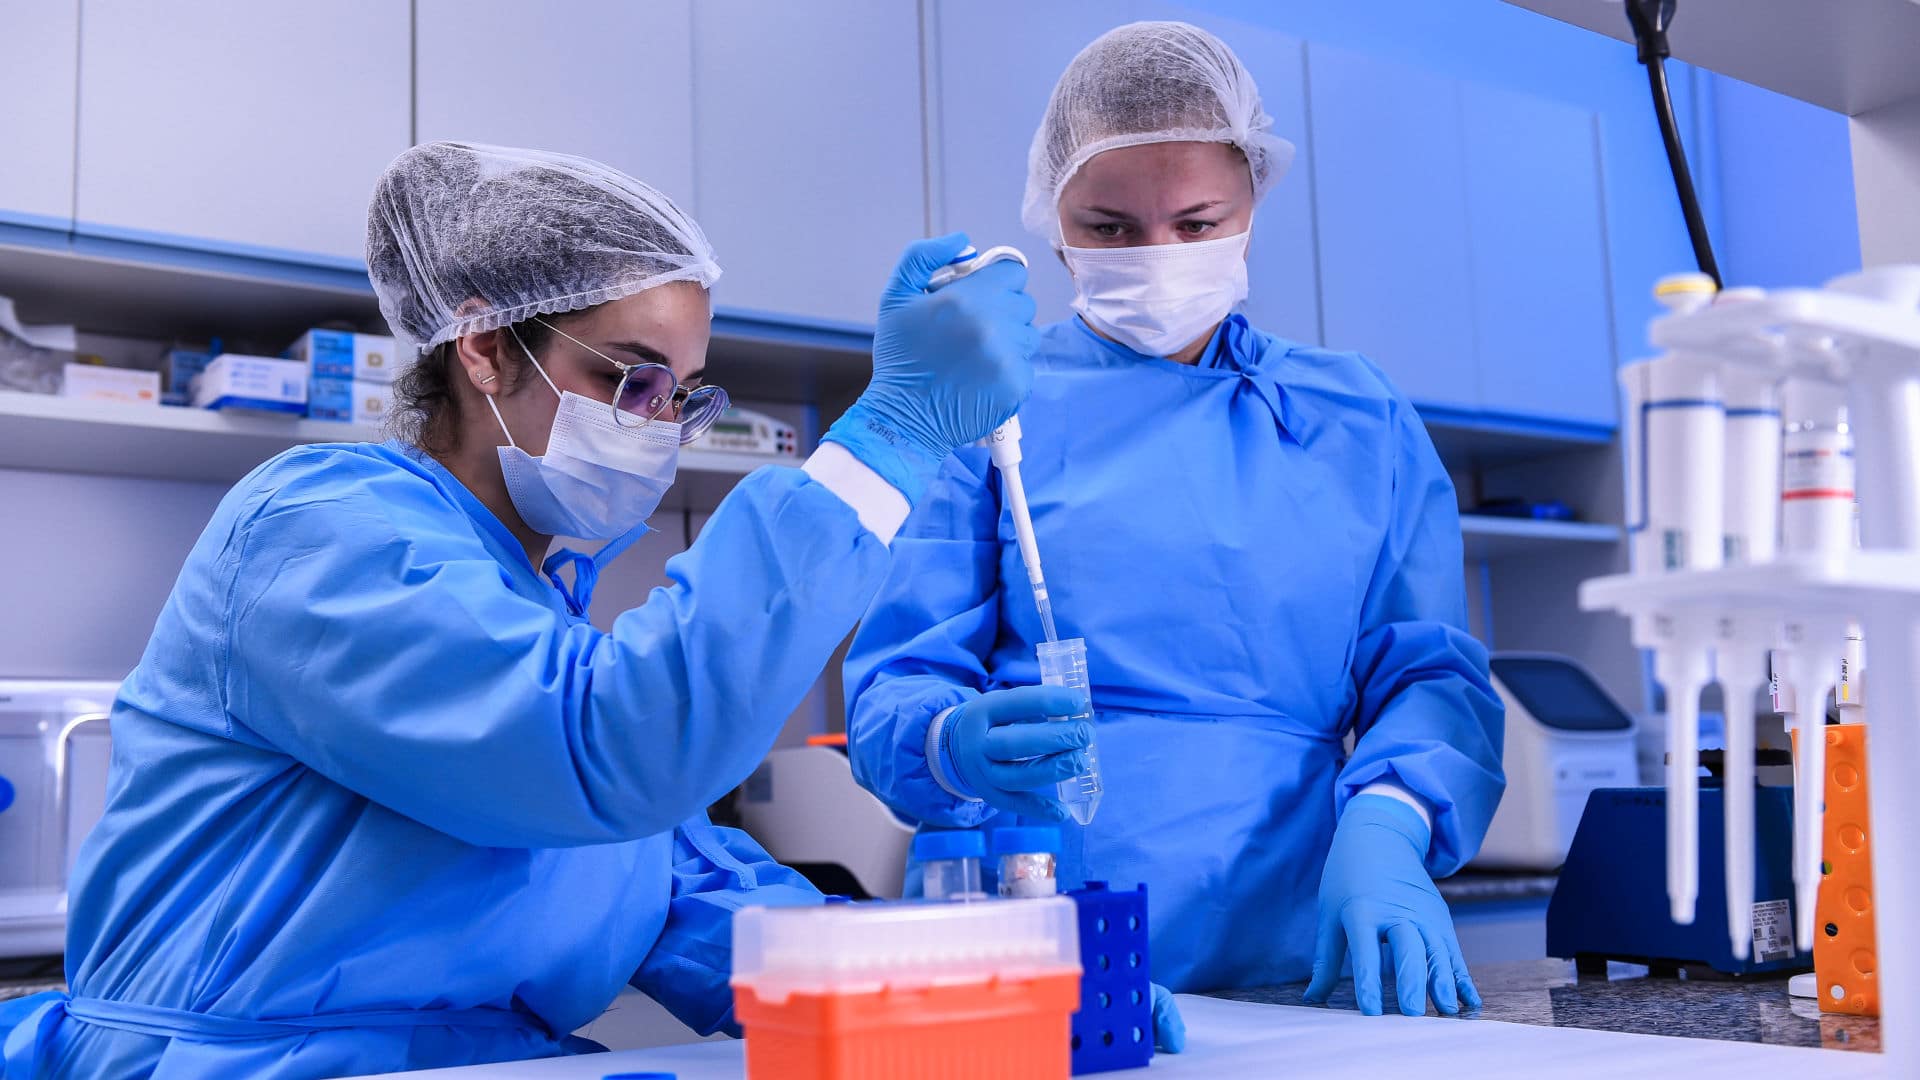 Biomedic Andressa Parreiras and biologist Larissa Vuitika extract genetic material from the SARS-CoV-2 virus on March 24, 2020 in Belo Horizonte, Brazil.